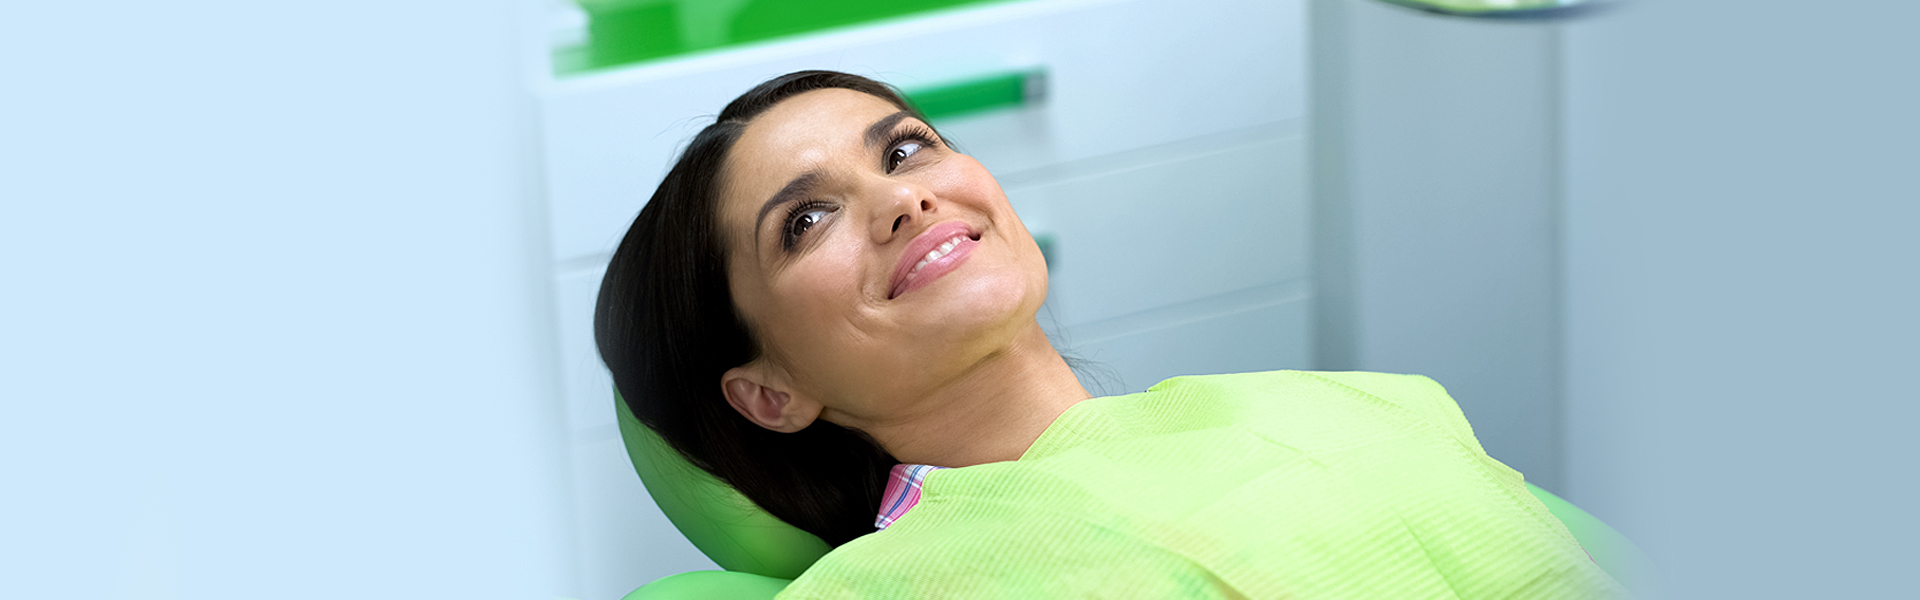 What Are Common Dental Problems Suitable for Cosmetic Dentistry?